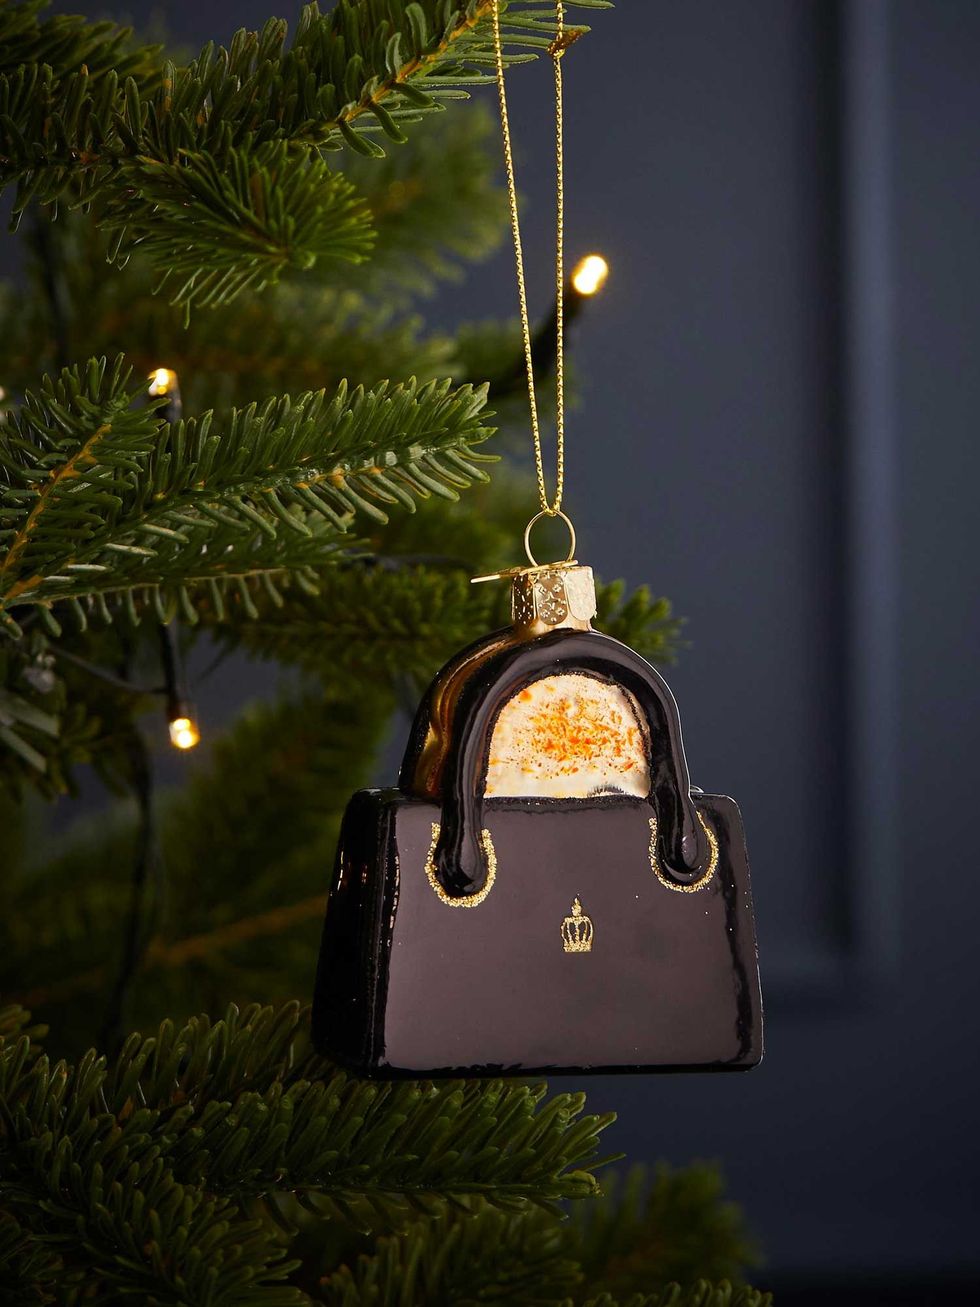 The best Liberty Christmas baubles to buy this year